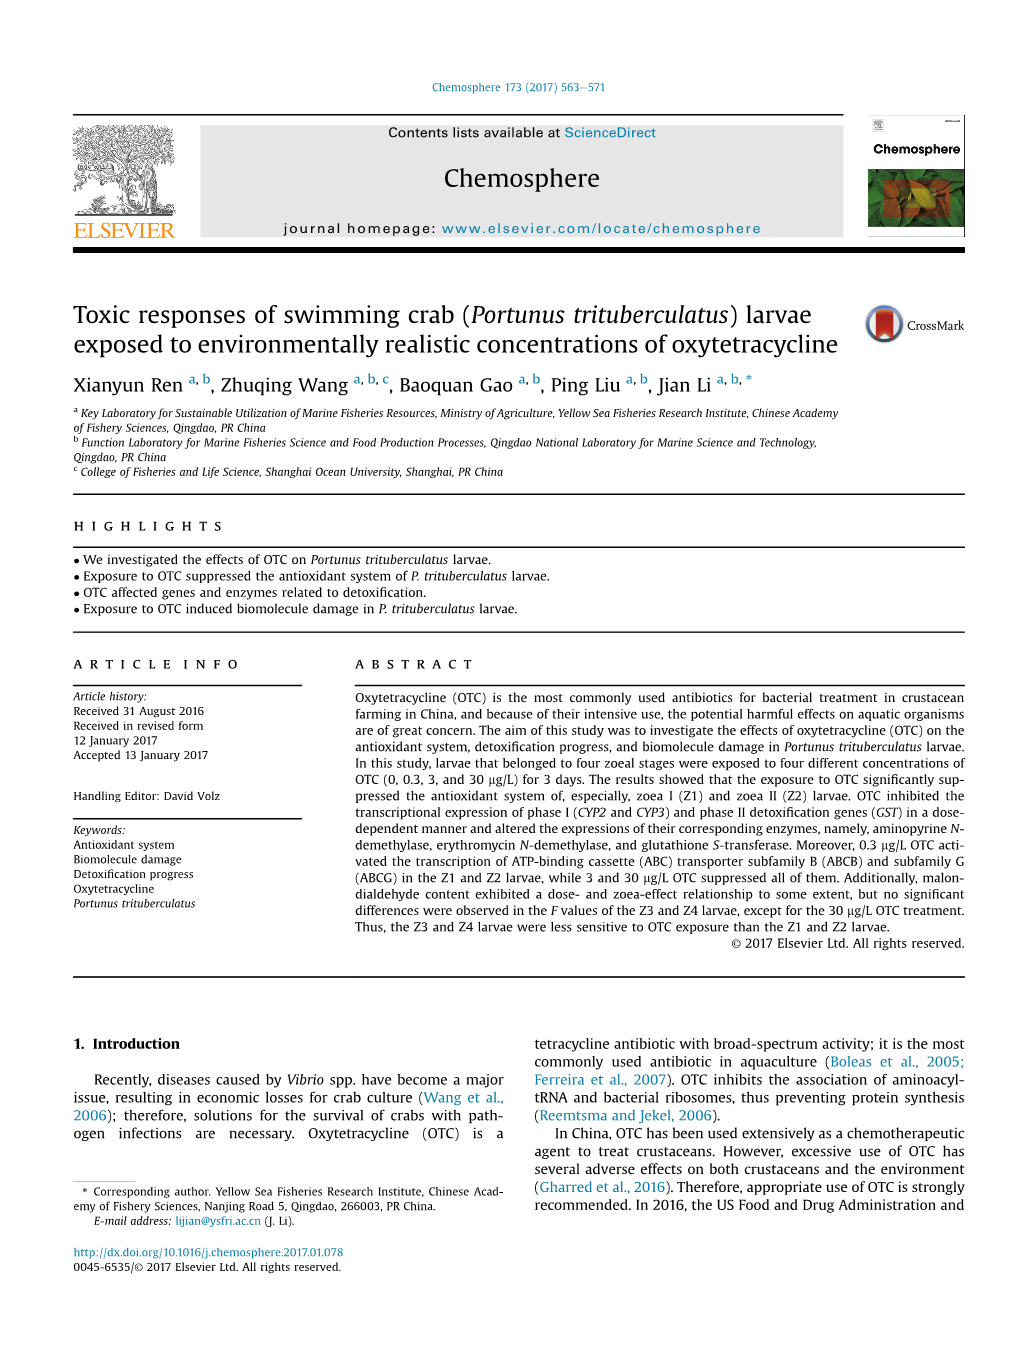 Toxic Responses of Swimming Crab (Portunus Trituberculatus) Larvae Exposed to Environmentally Realistic Concentrations of Oxytetracycline